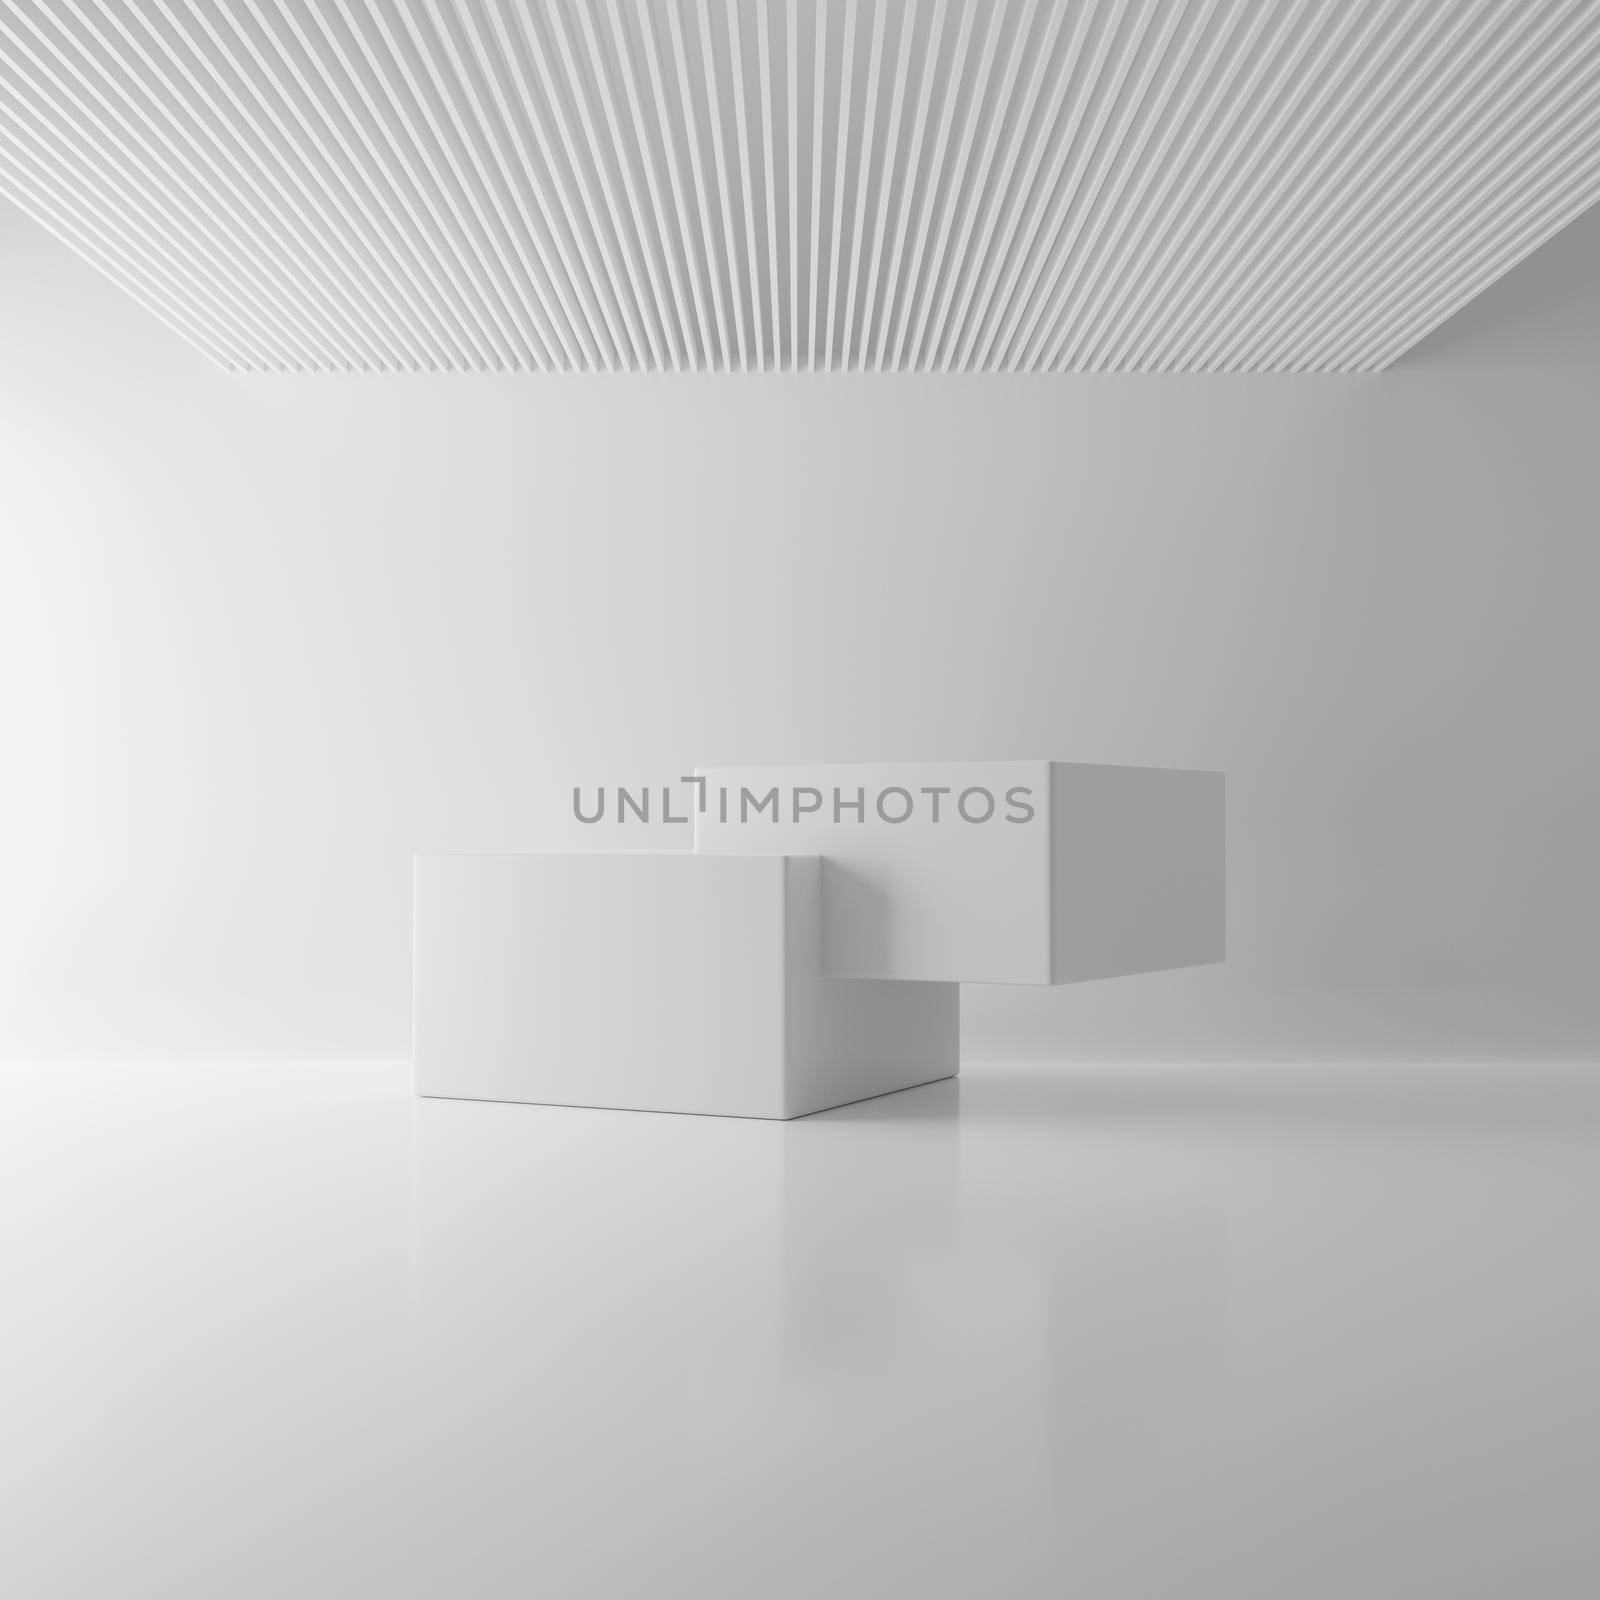 White two rectangle block cube in ceiling room background. Abstract modern architecture mockup concept. Minimal interior. Studio podium platform. Business presentation stage. 3D illustration render by MiniStocker